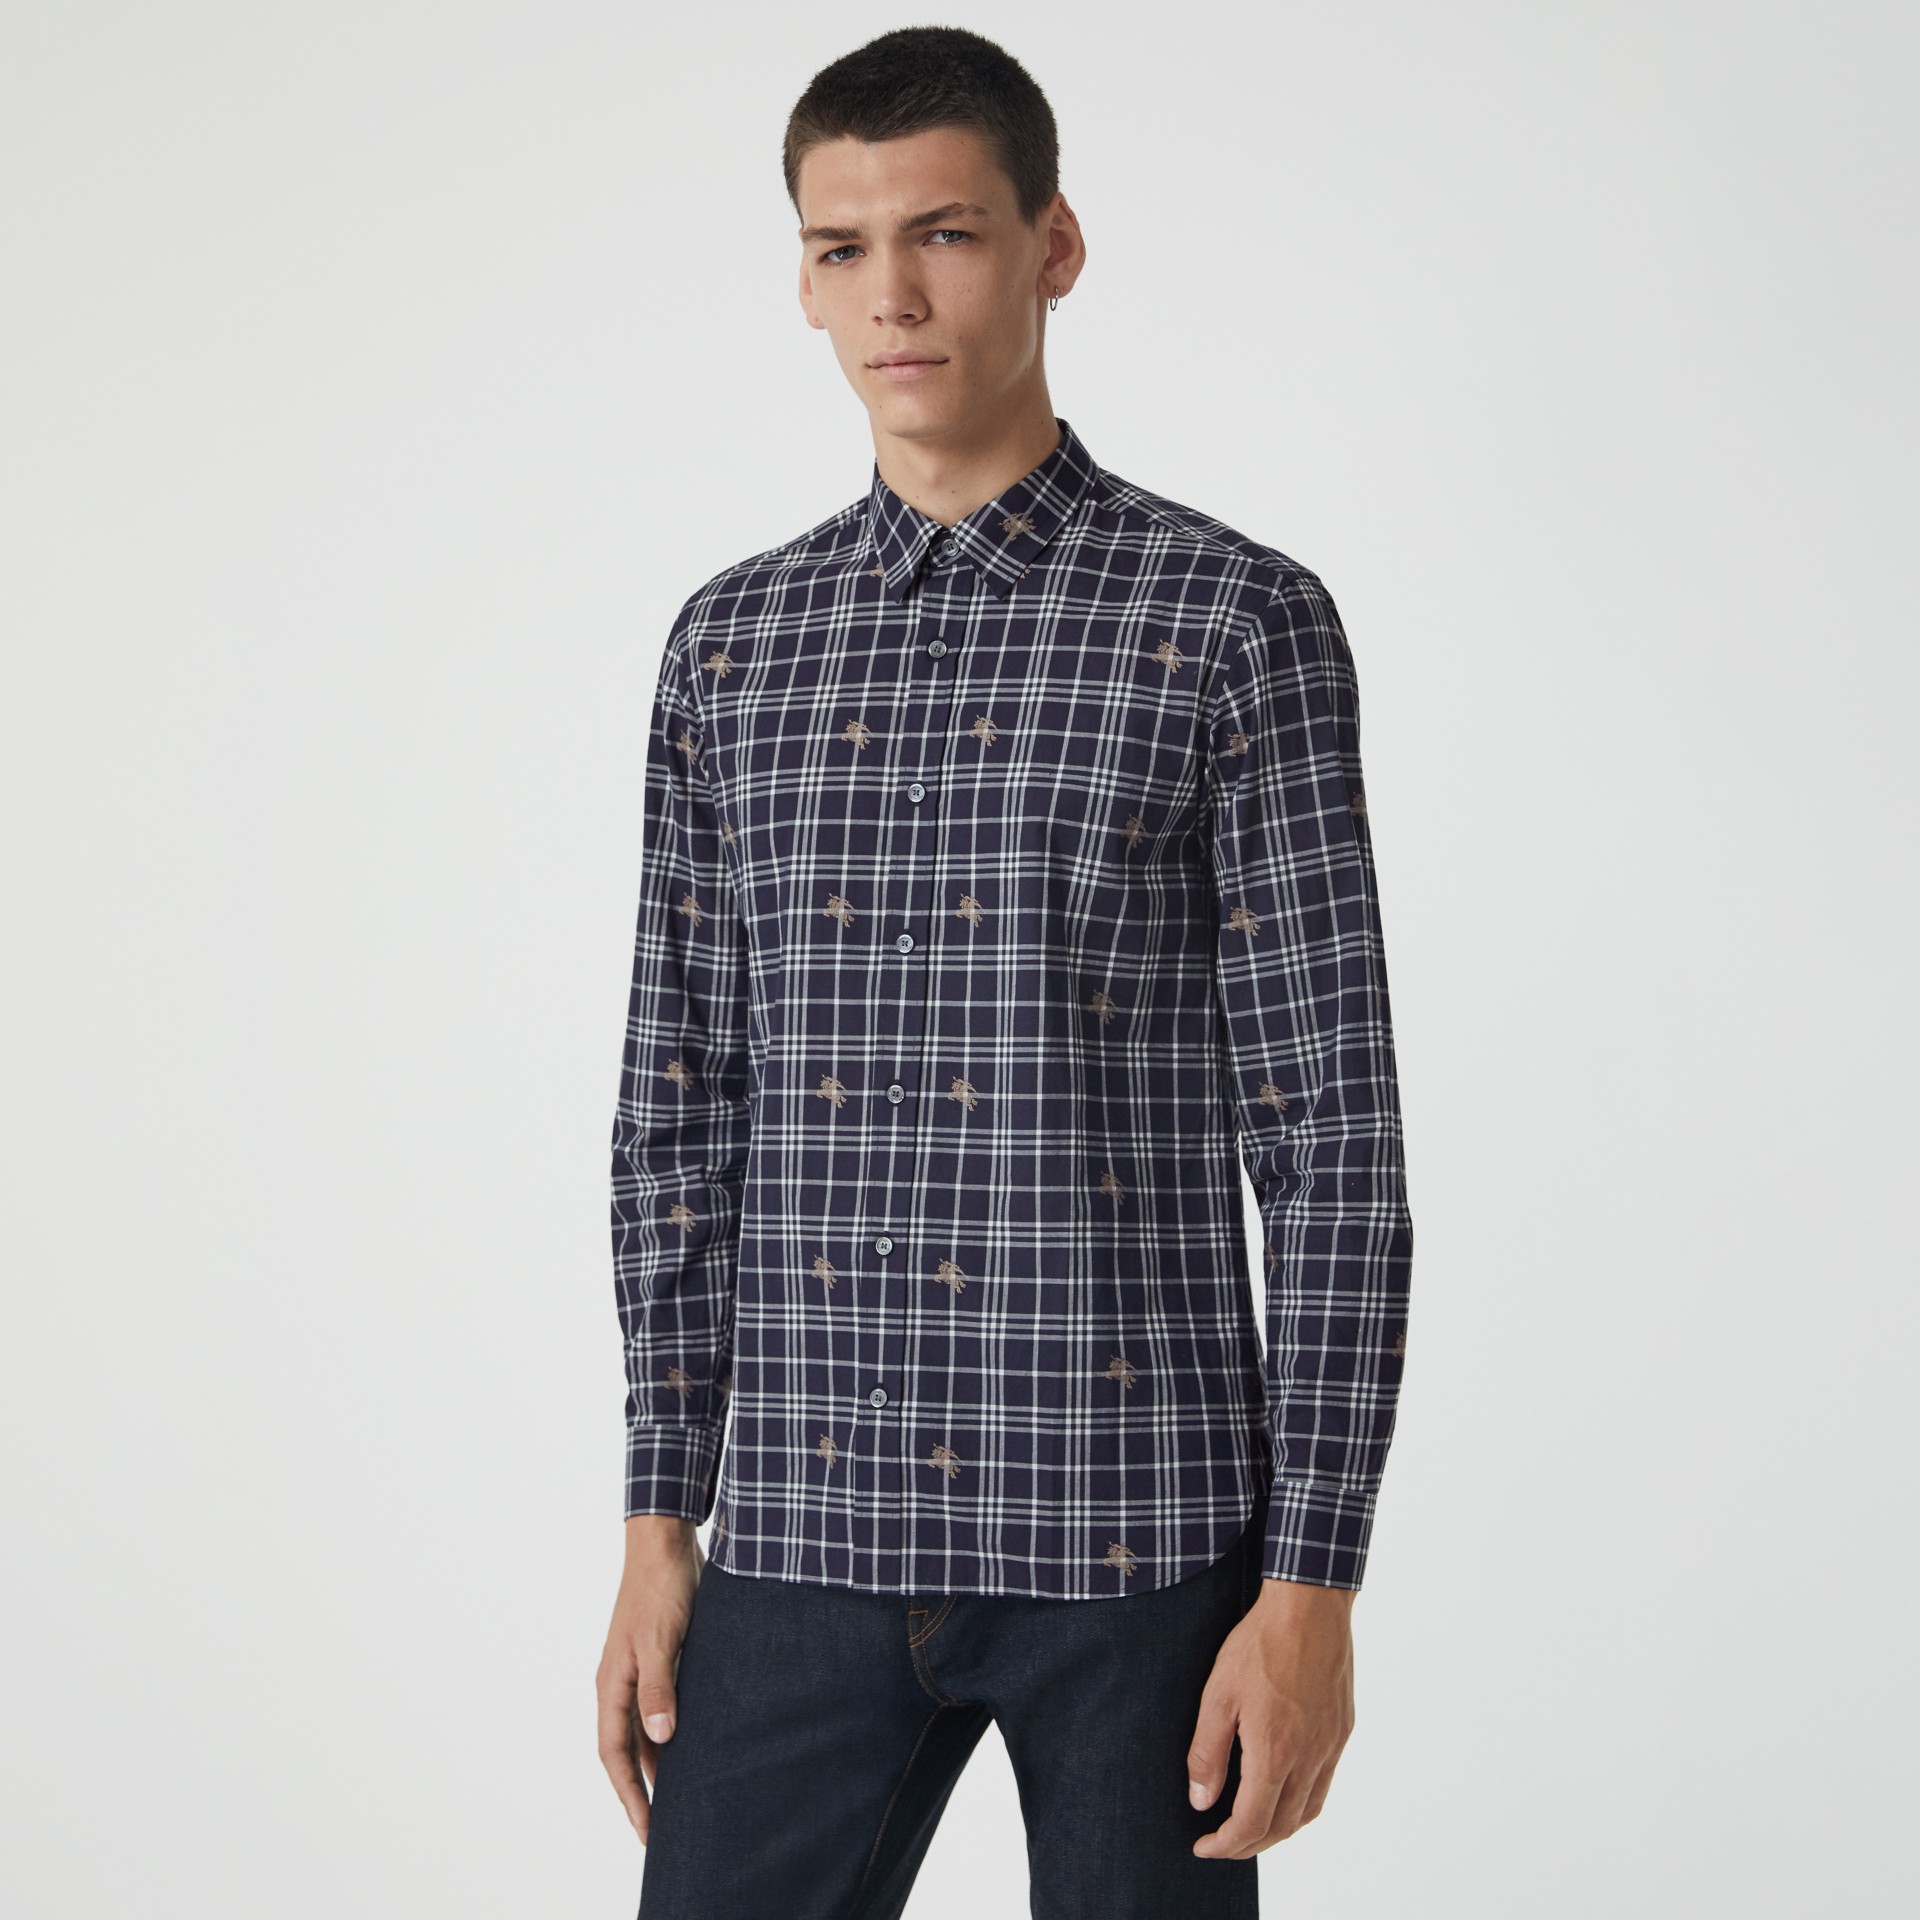 Equestrian Knight Check Cotton Shirt in Navy - Men | Burberry United States